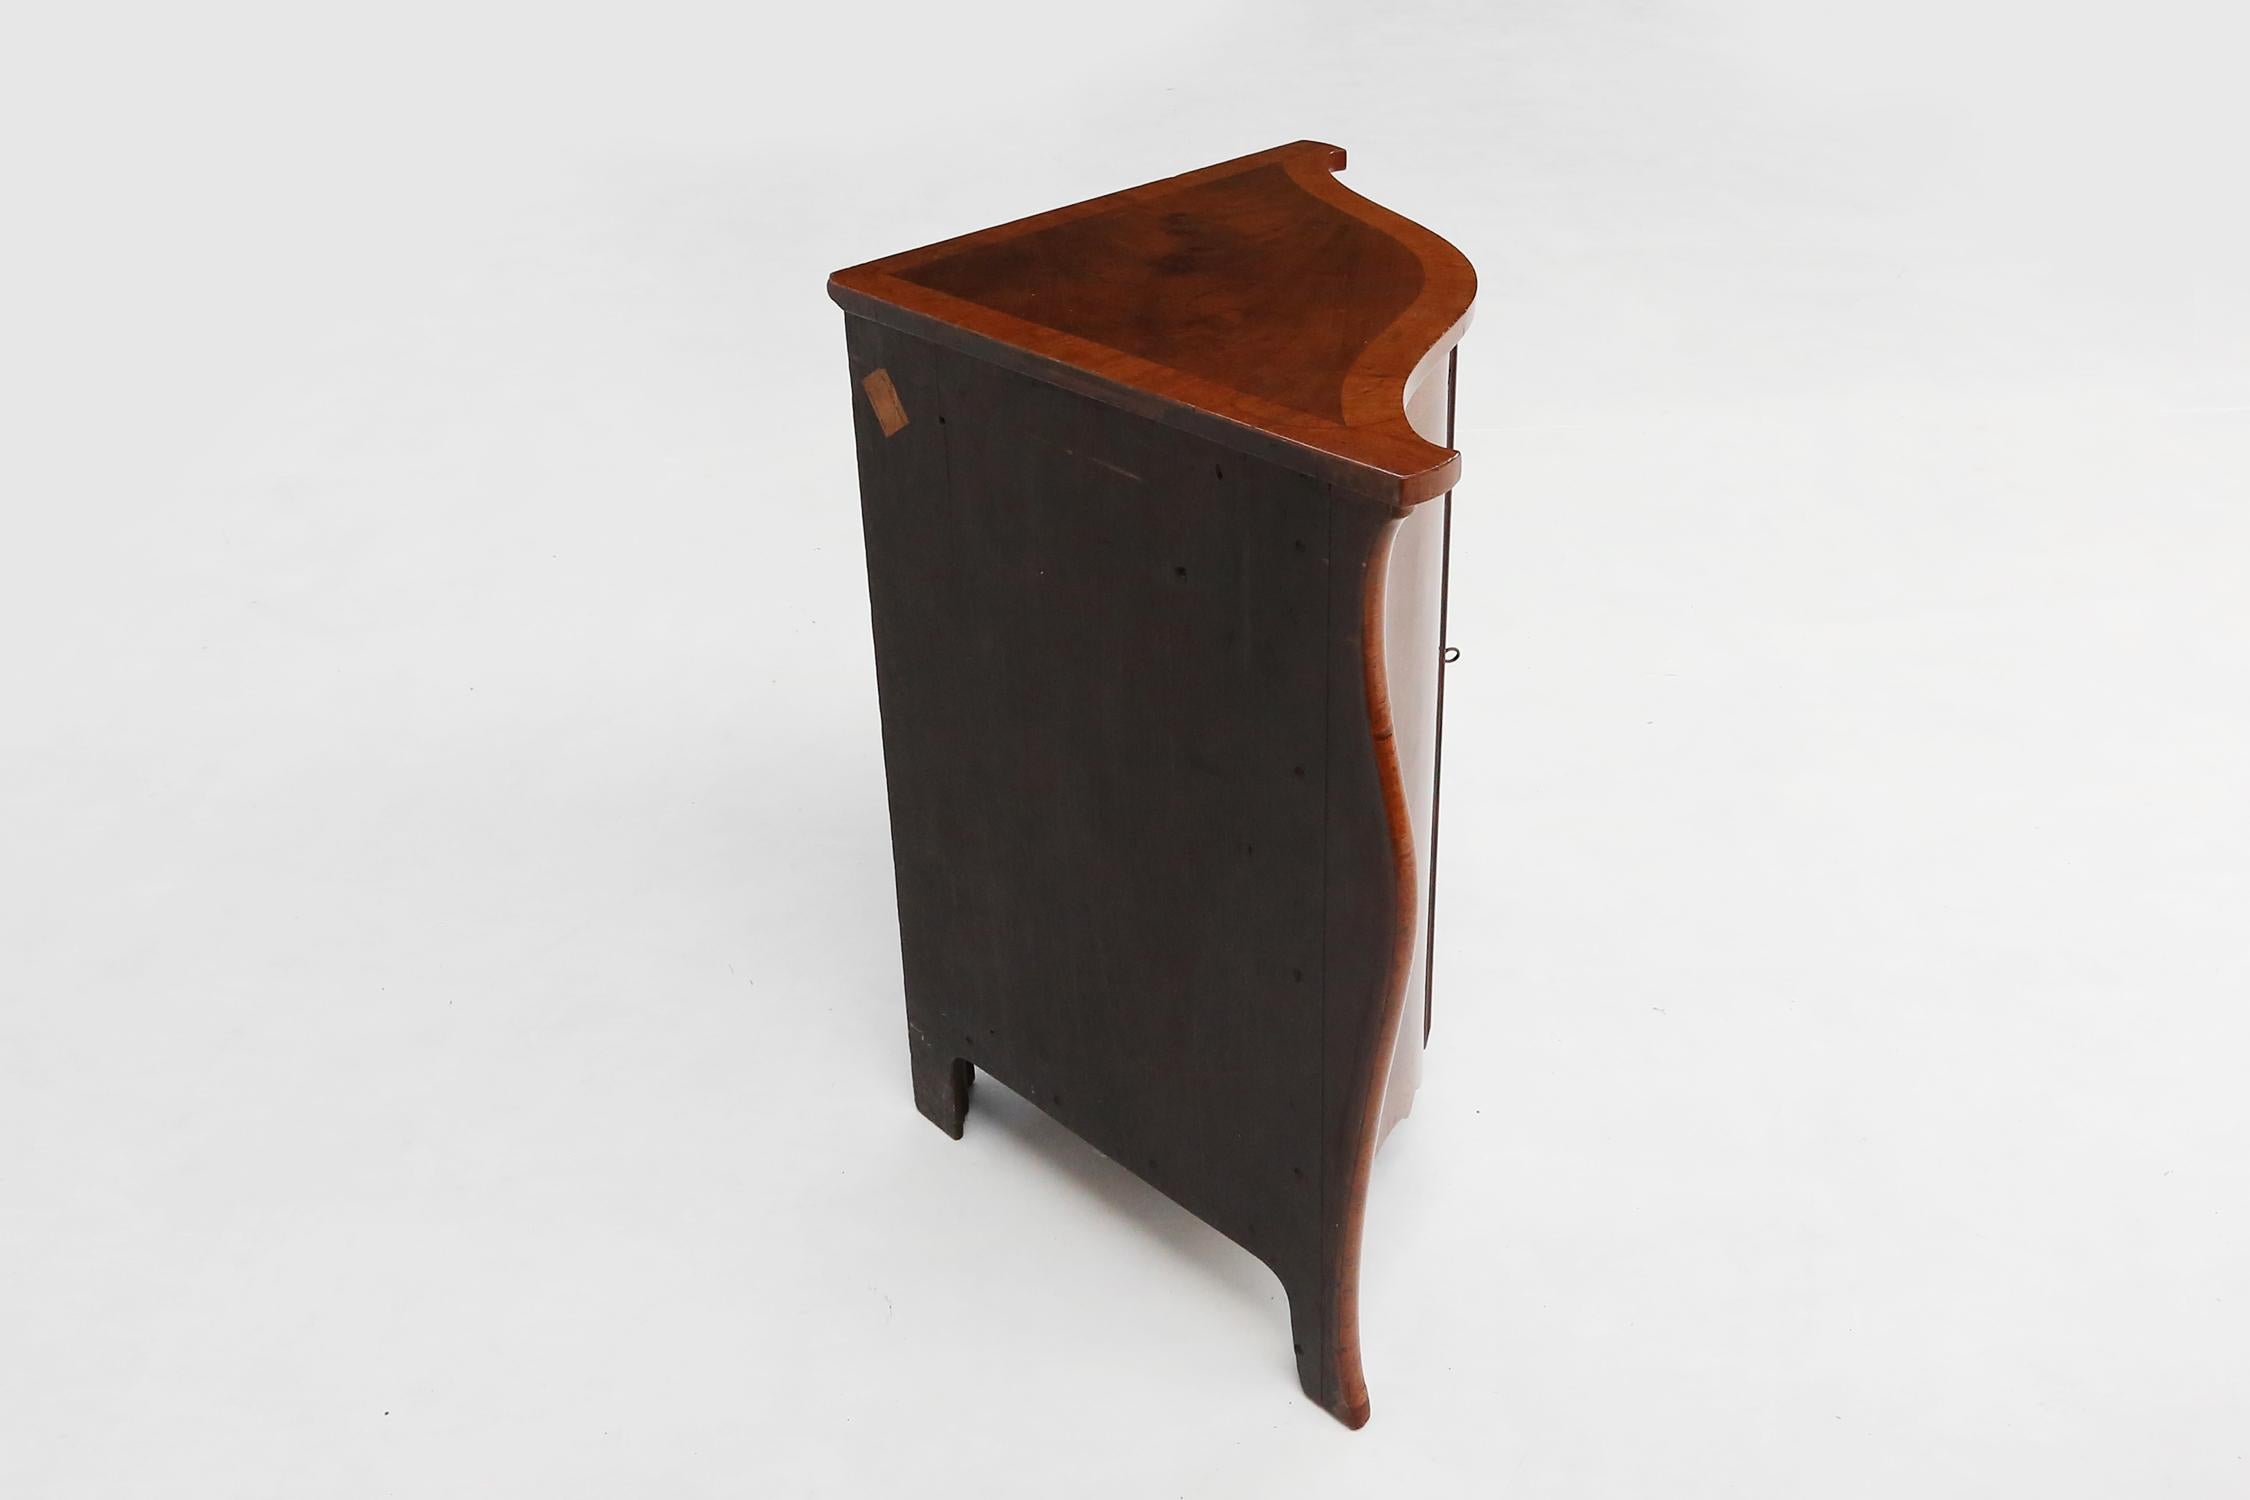 
This corner cabinet is made of wood and has a curved front, giving it an elegant and charming look. The corner cabinet has two doors with a keyhole in the middle, so you can safely store your belongings. The corner cabinet has a wooden top with a